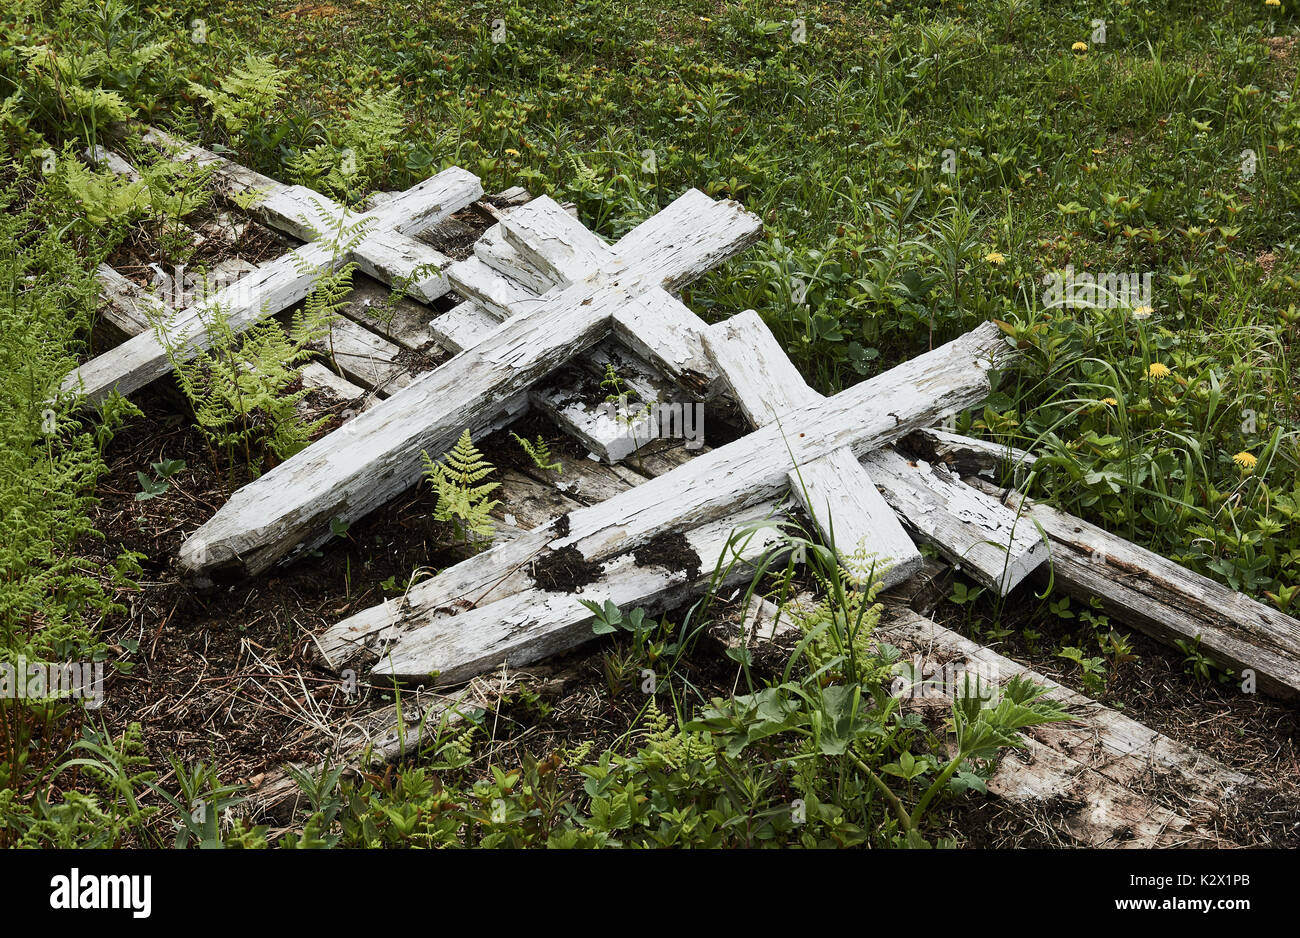 Pile of discarded unmarked wooden crosses, Newfoundland, Canada Stock Photo